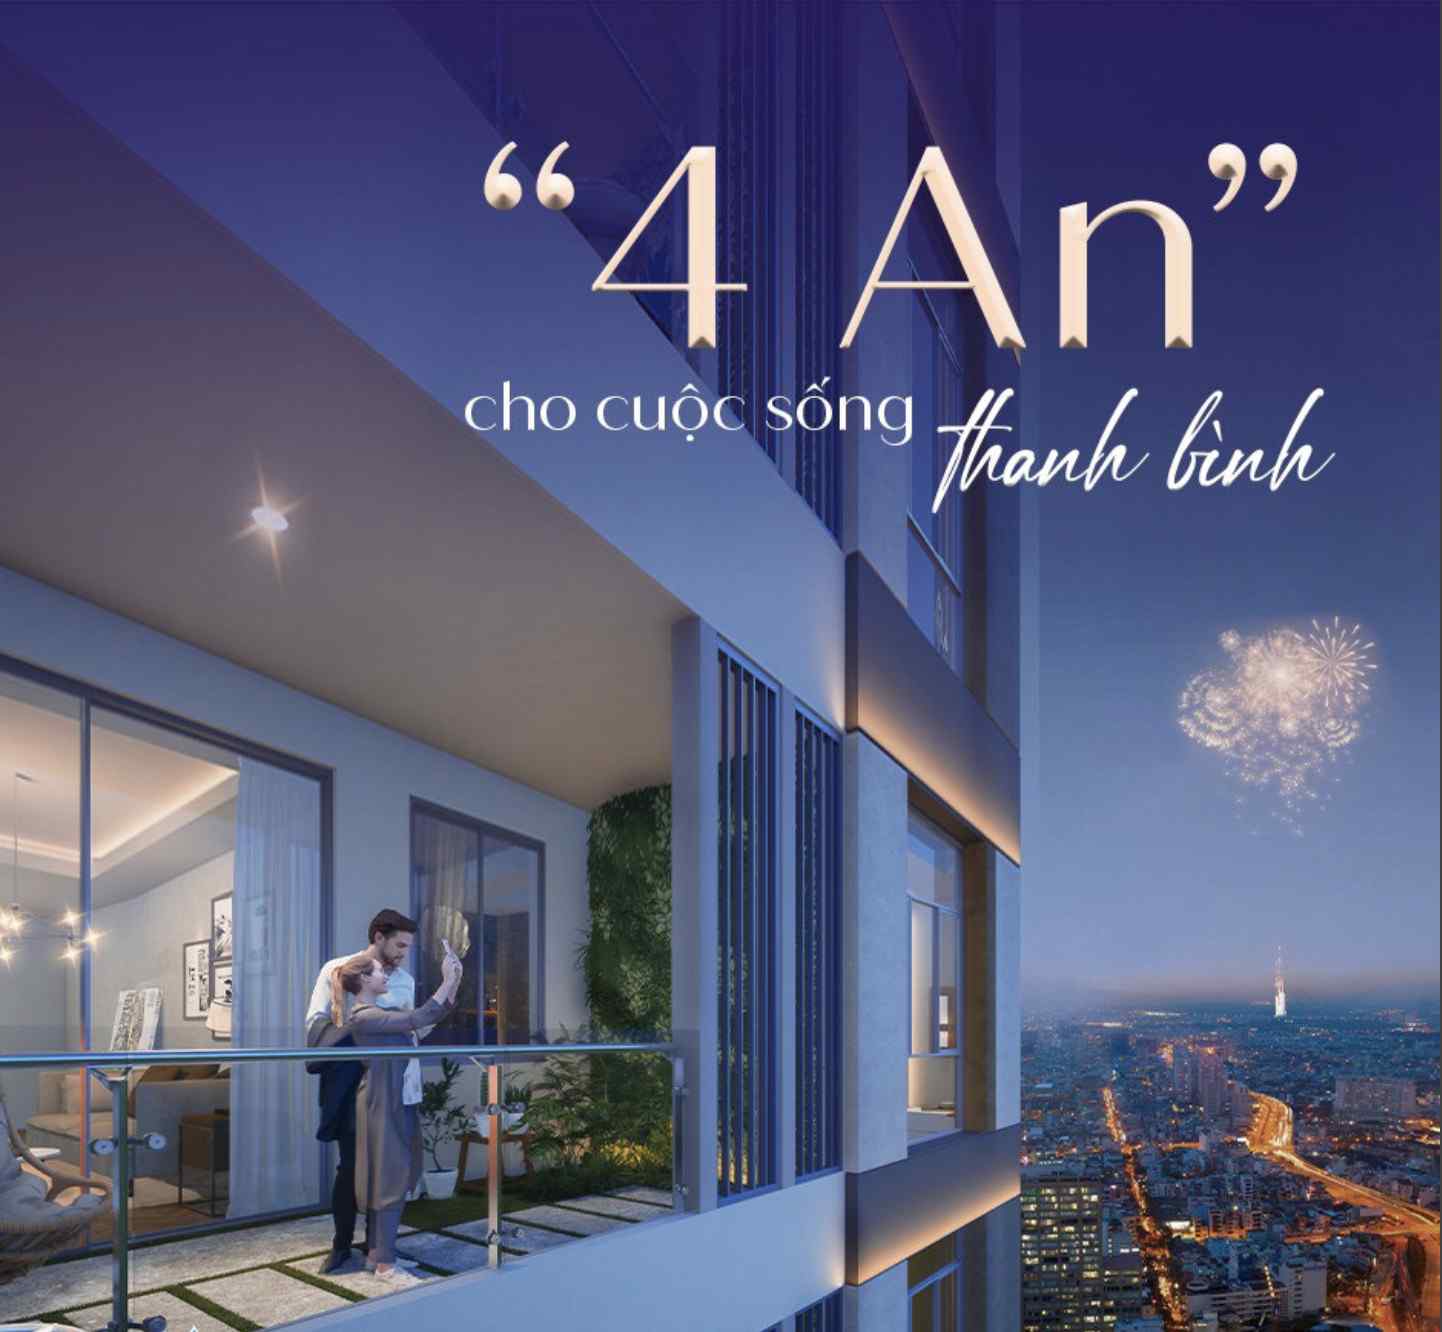 Masterpiece in the east of Ho Chi Minh City - Apartment "4 AN - 0 RISK" with the project at the gateway of the city. Thu Duc